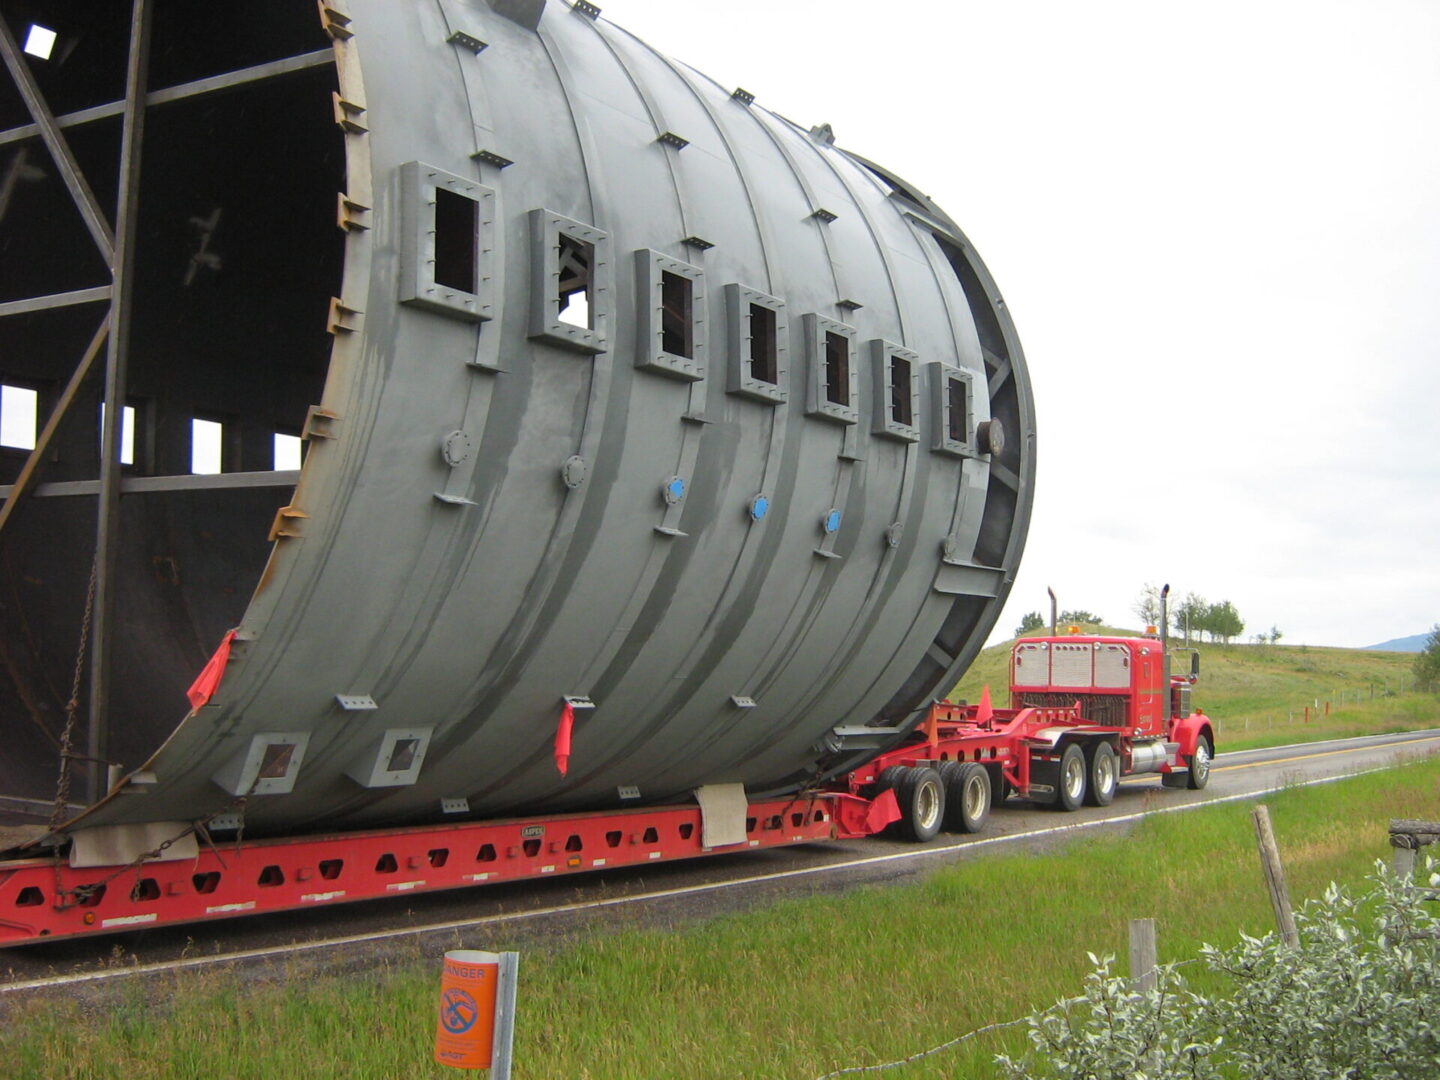 A large gray container on a truck.